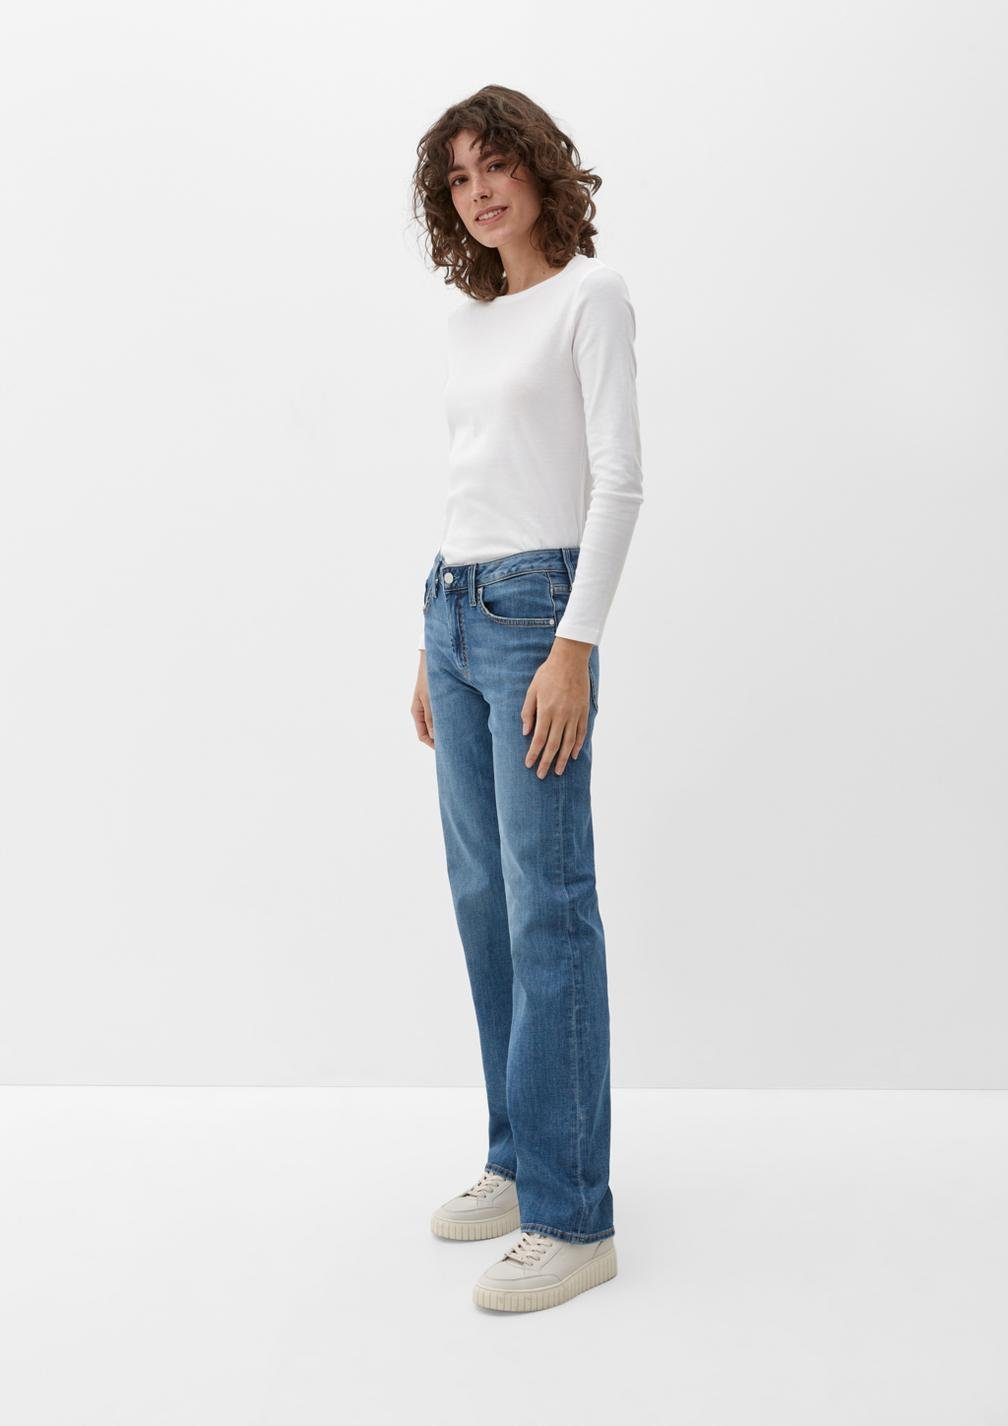 s.Oliver Comfort-fit-Jeans KAROLIN / Waschung, leichter / Leg Fit mit Mid Straight rise Blau Relaxed